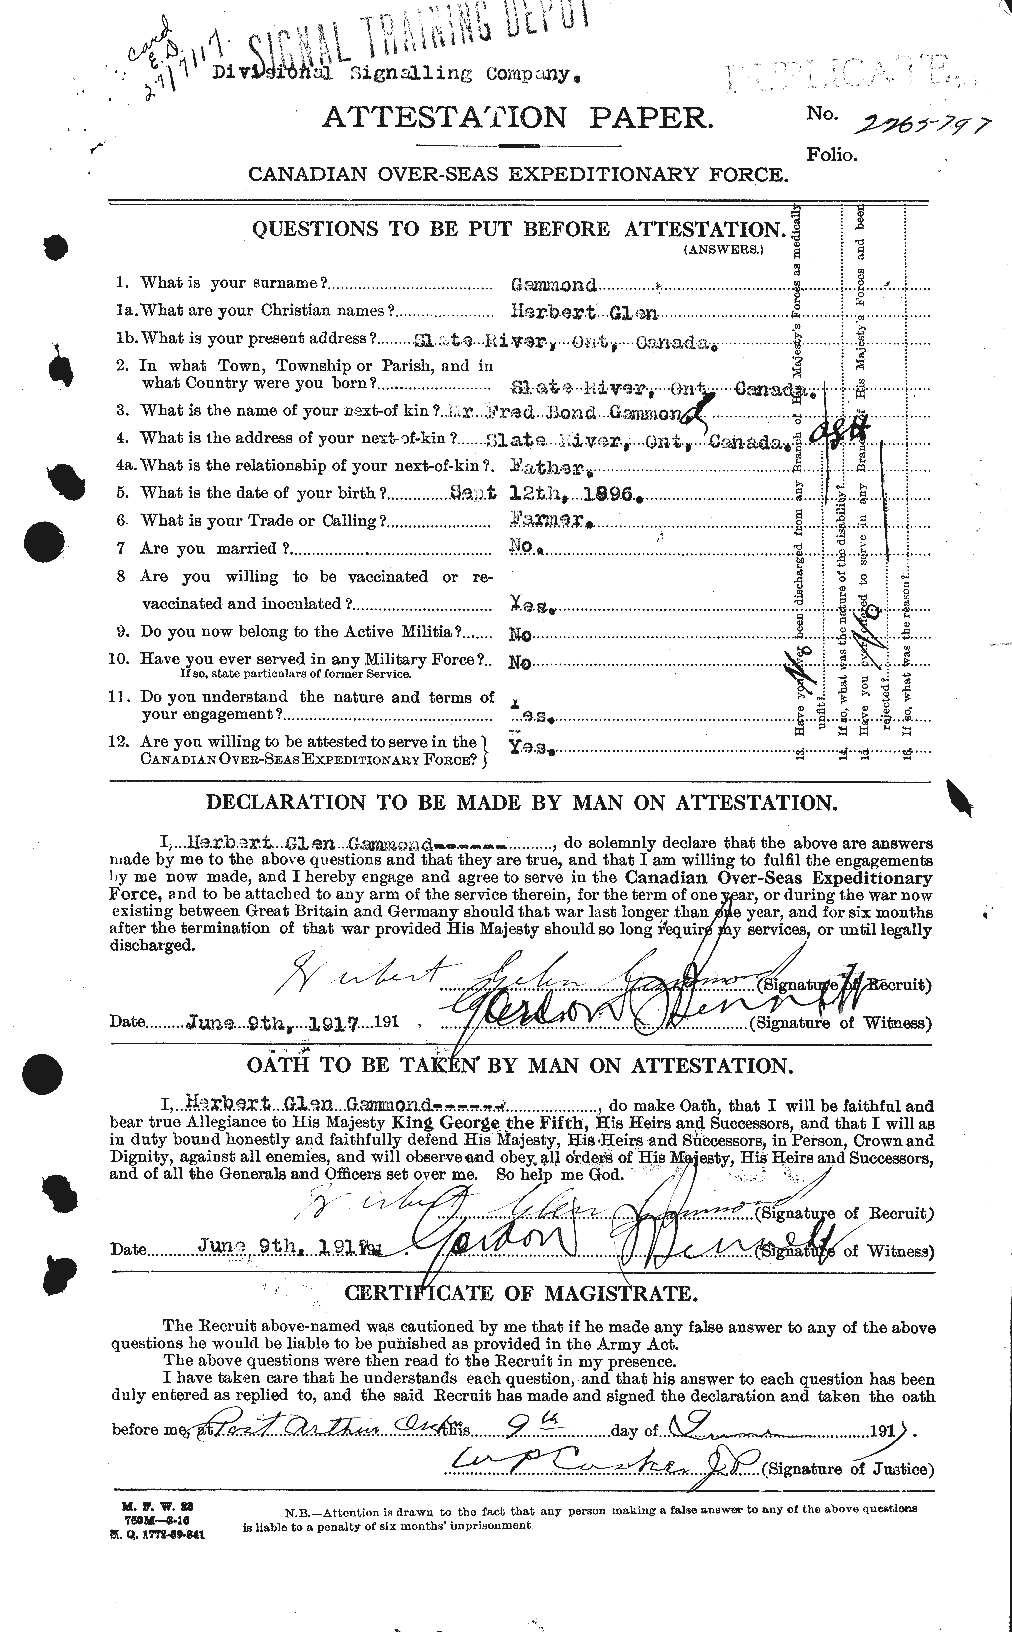 Personnel Records of the First World War - CEF 343090a